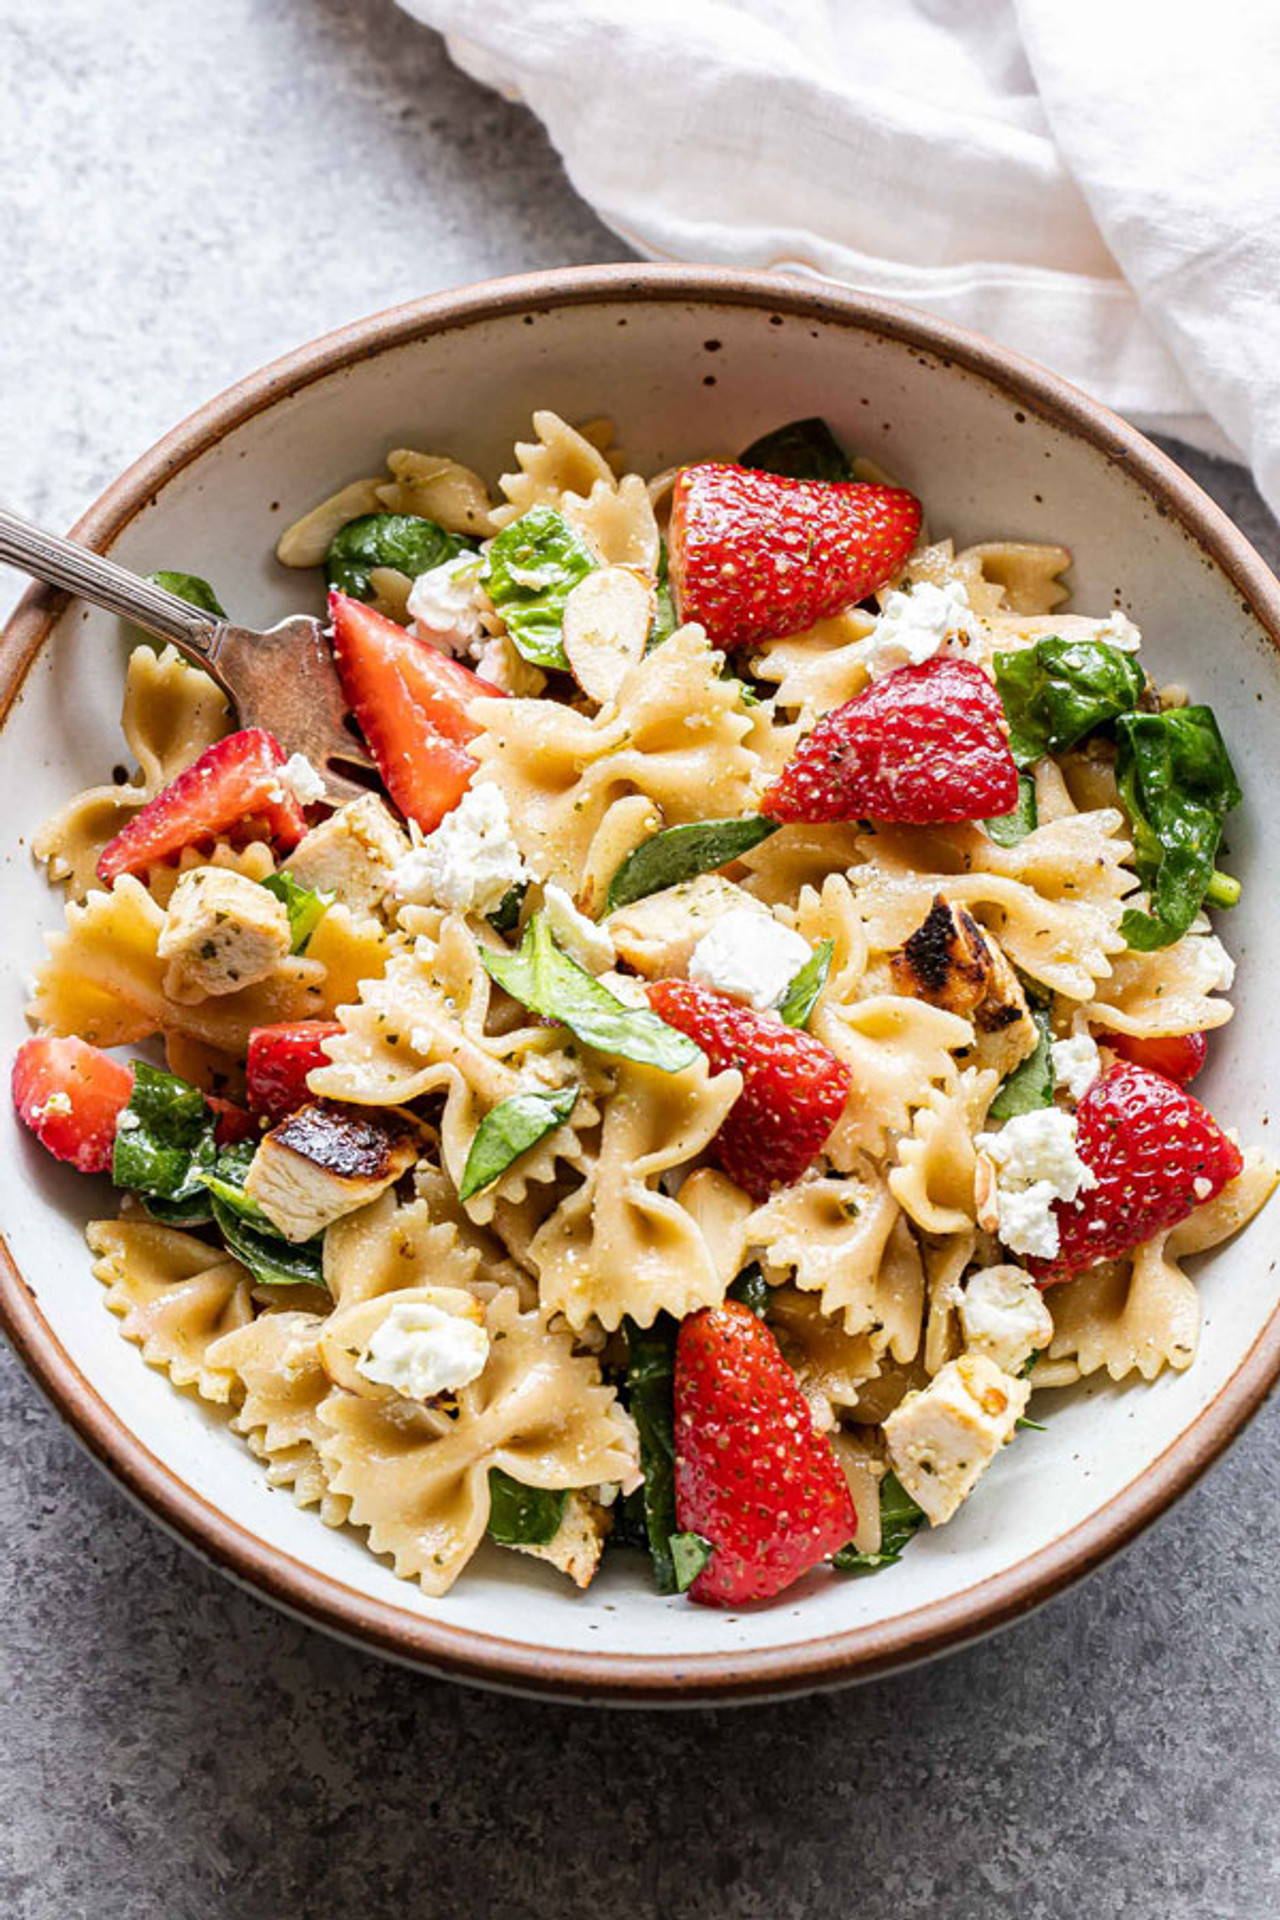 Pasta salad with strawberries, grilled chicken and spinach